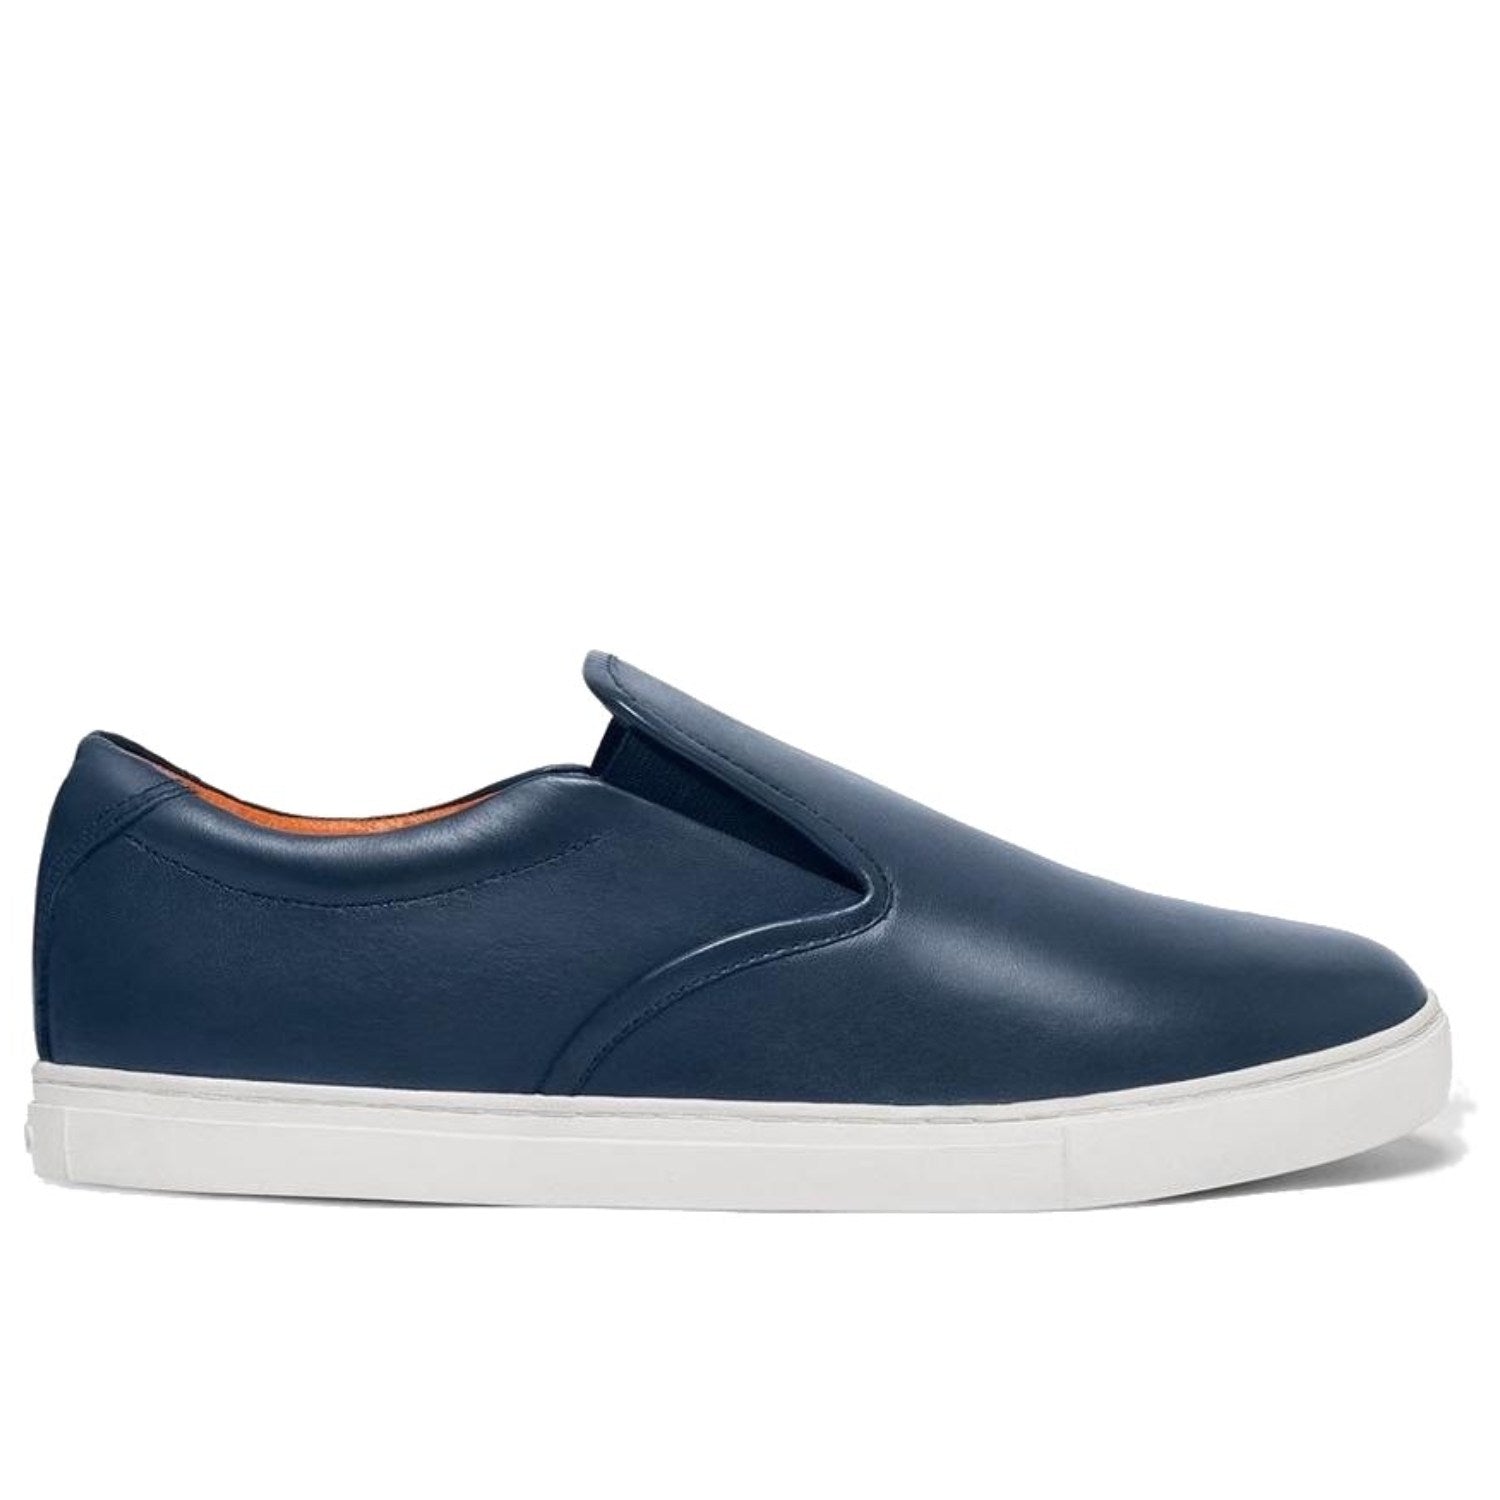 ONTO Reed -  navy Leather Slip On with white rubber sole